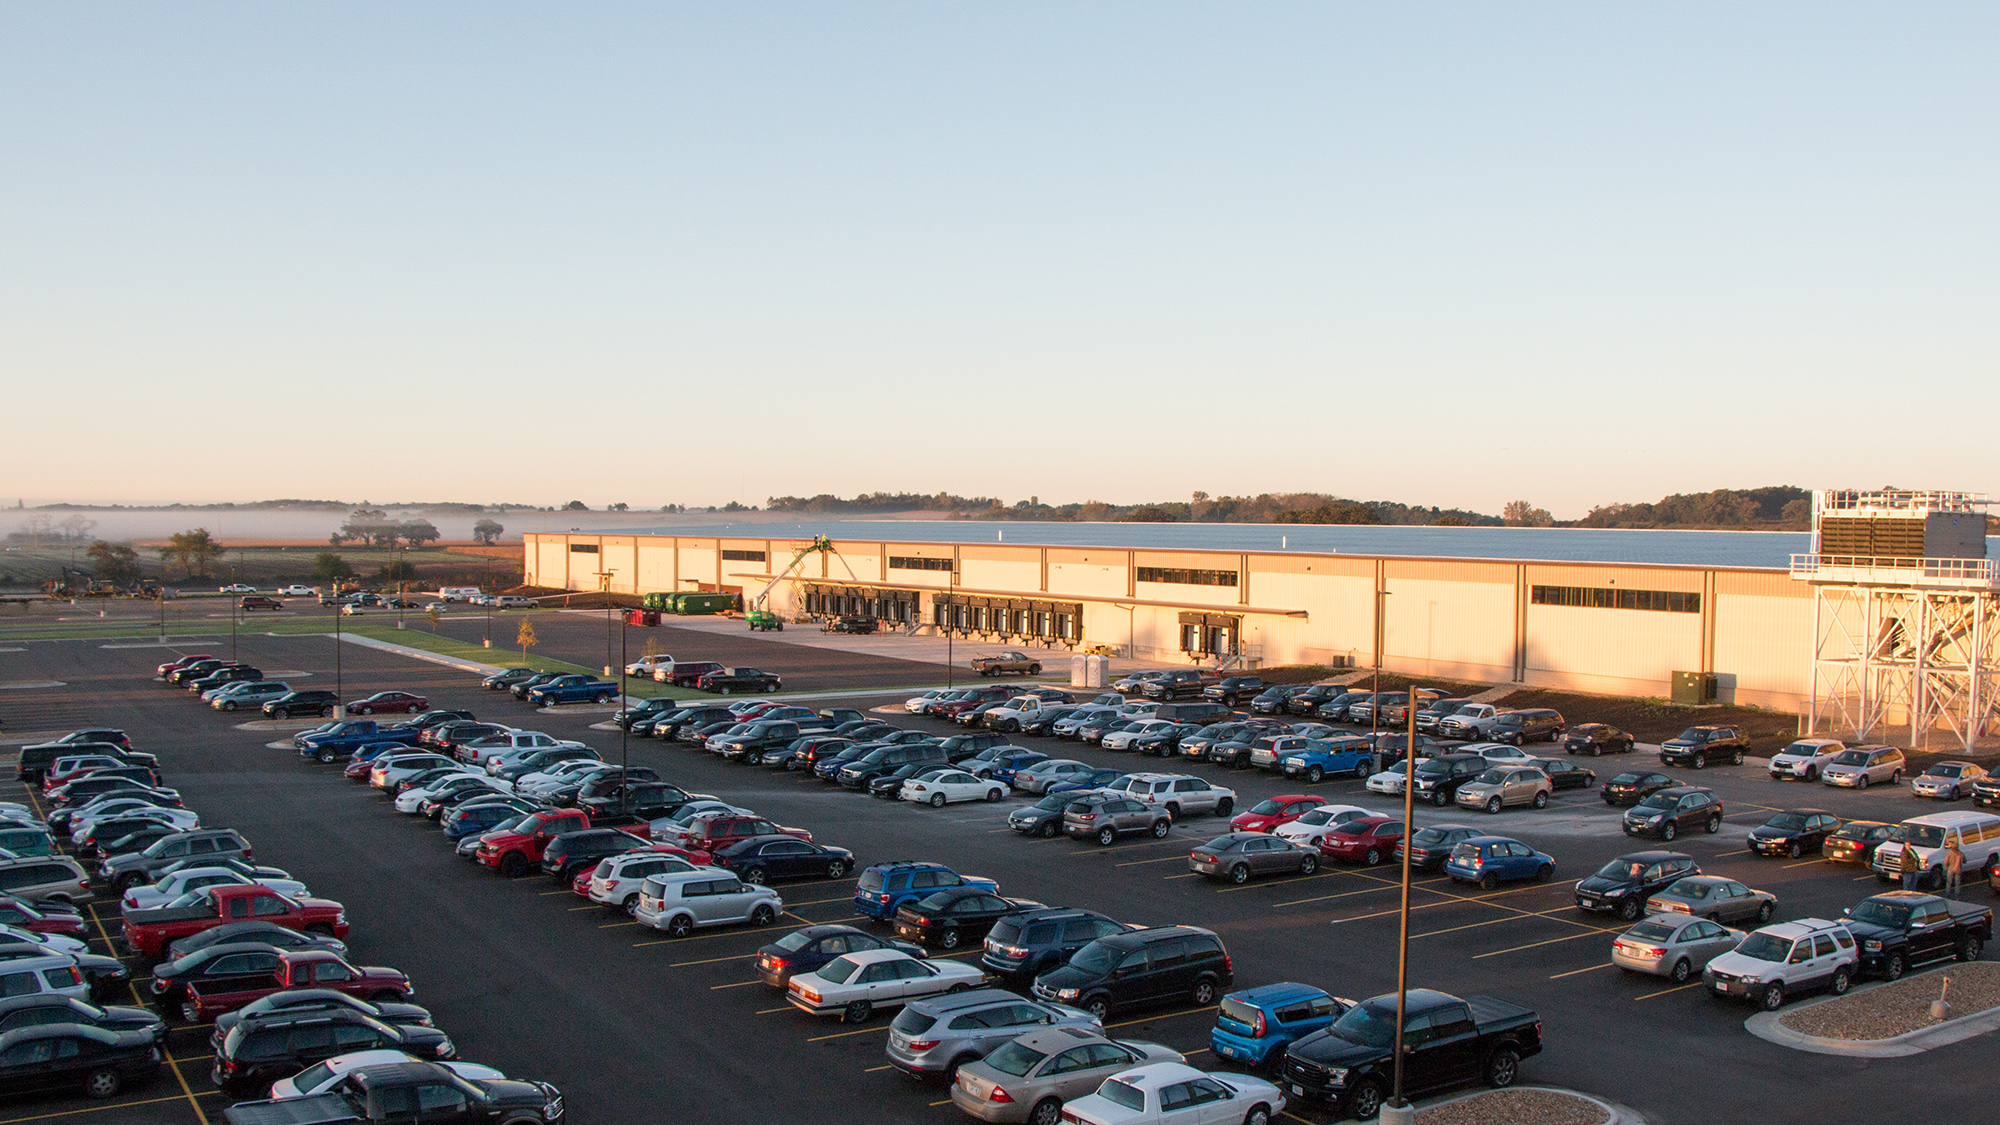 Manufacturing facility exterior and extensive parking